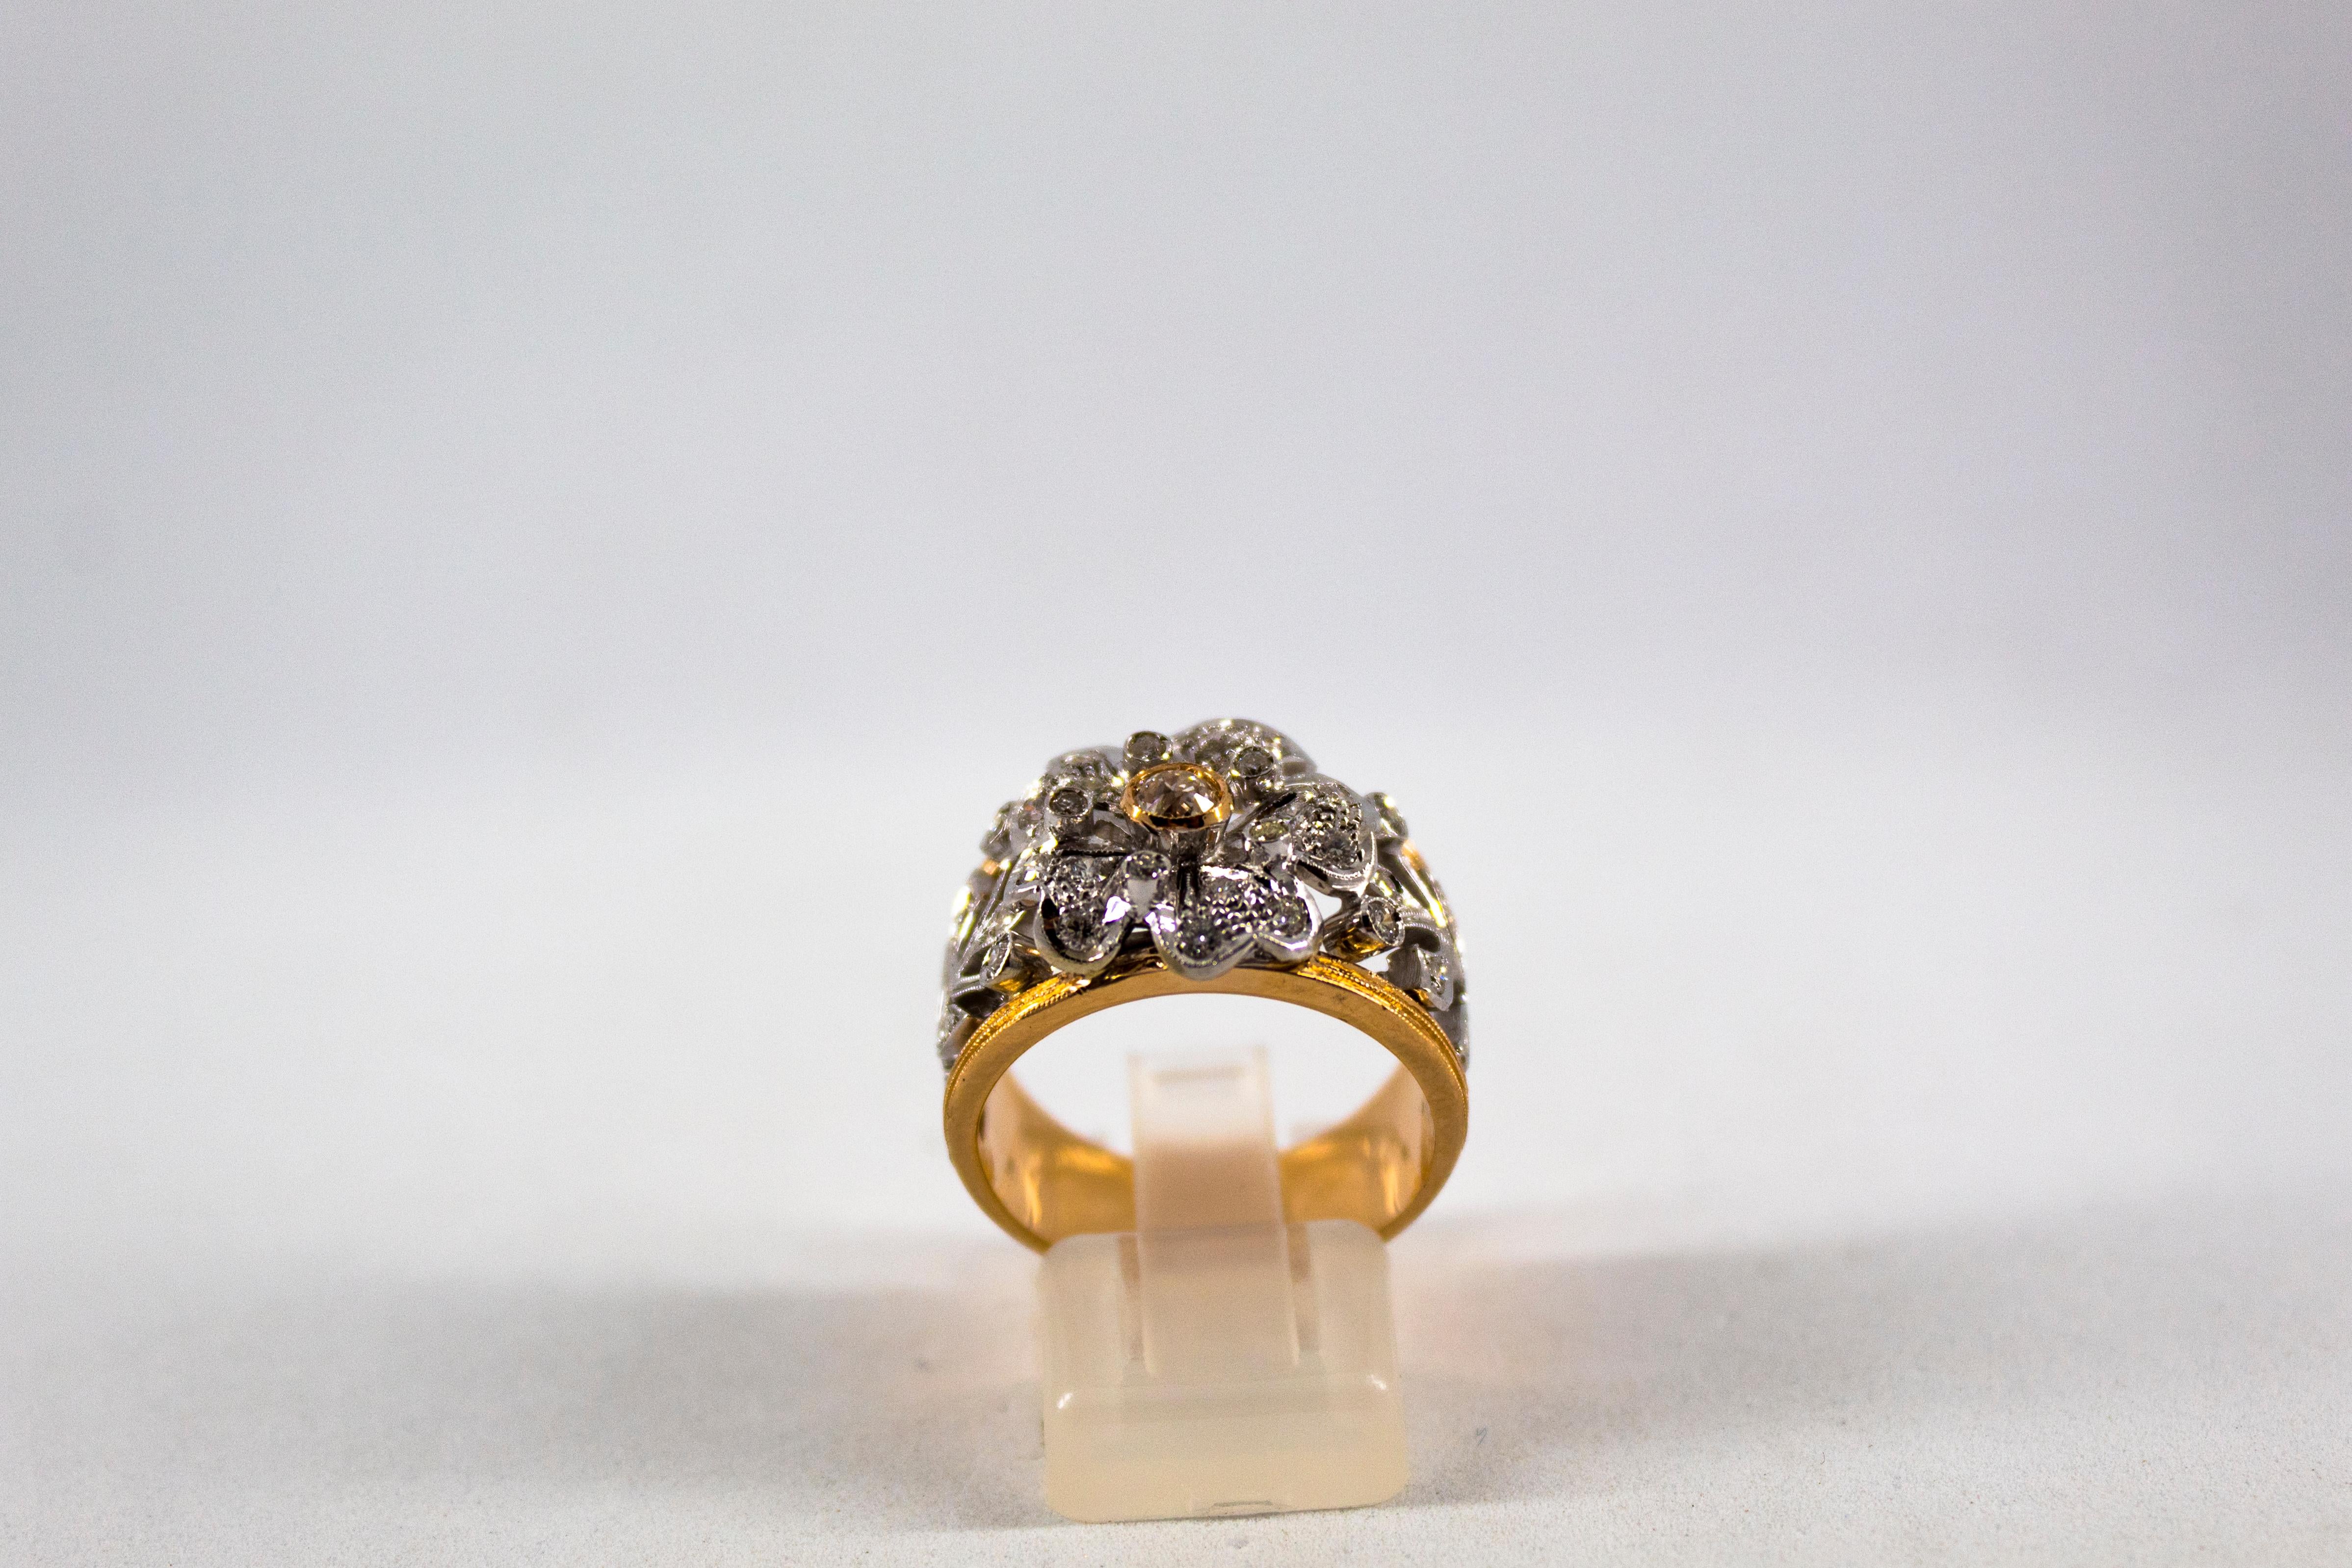 This Ring is made of 14K Yellow Gold.
This Ring has 0.70 Carats of White Diamonds.

This Ring is available also with different central stone: it's available with Emerald, Ruby or Blue Sapphire.

Size ITA: 17 USA: 8

We're a workshop so every piece